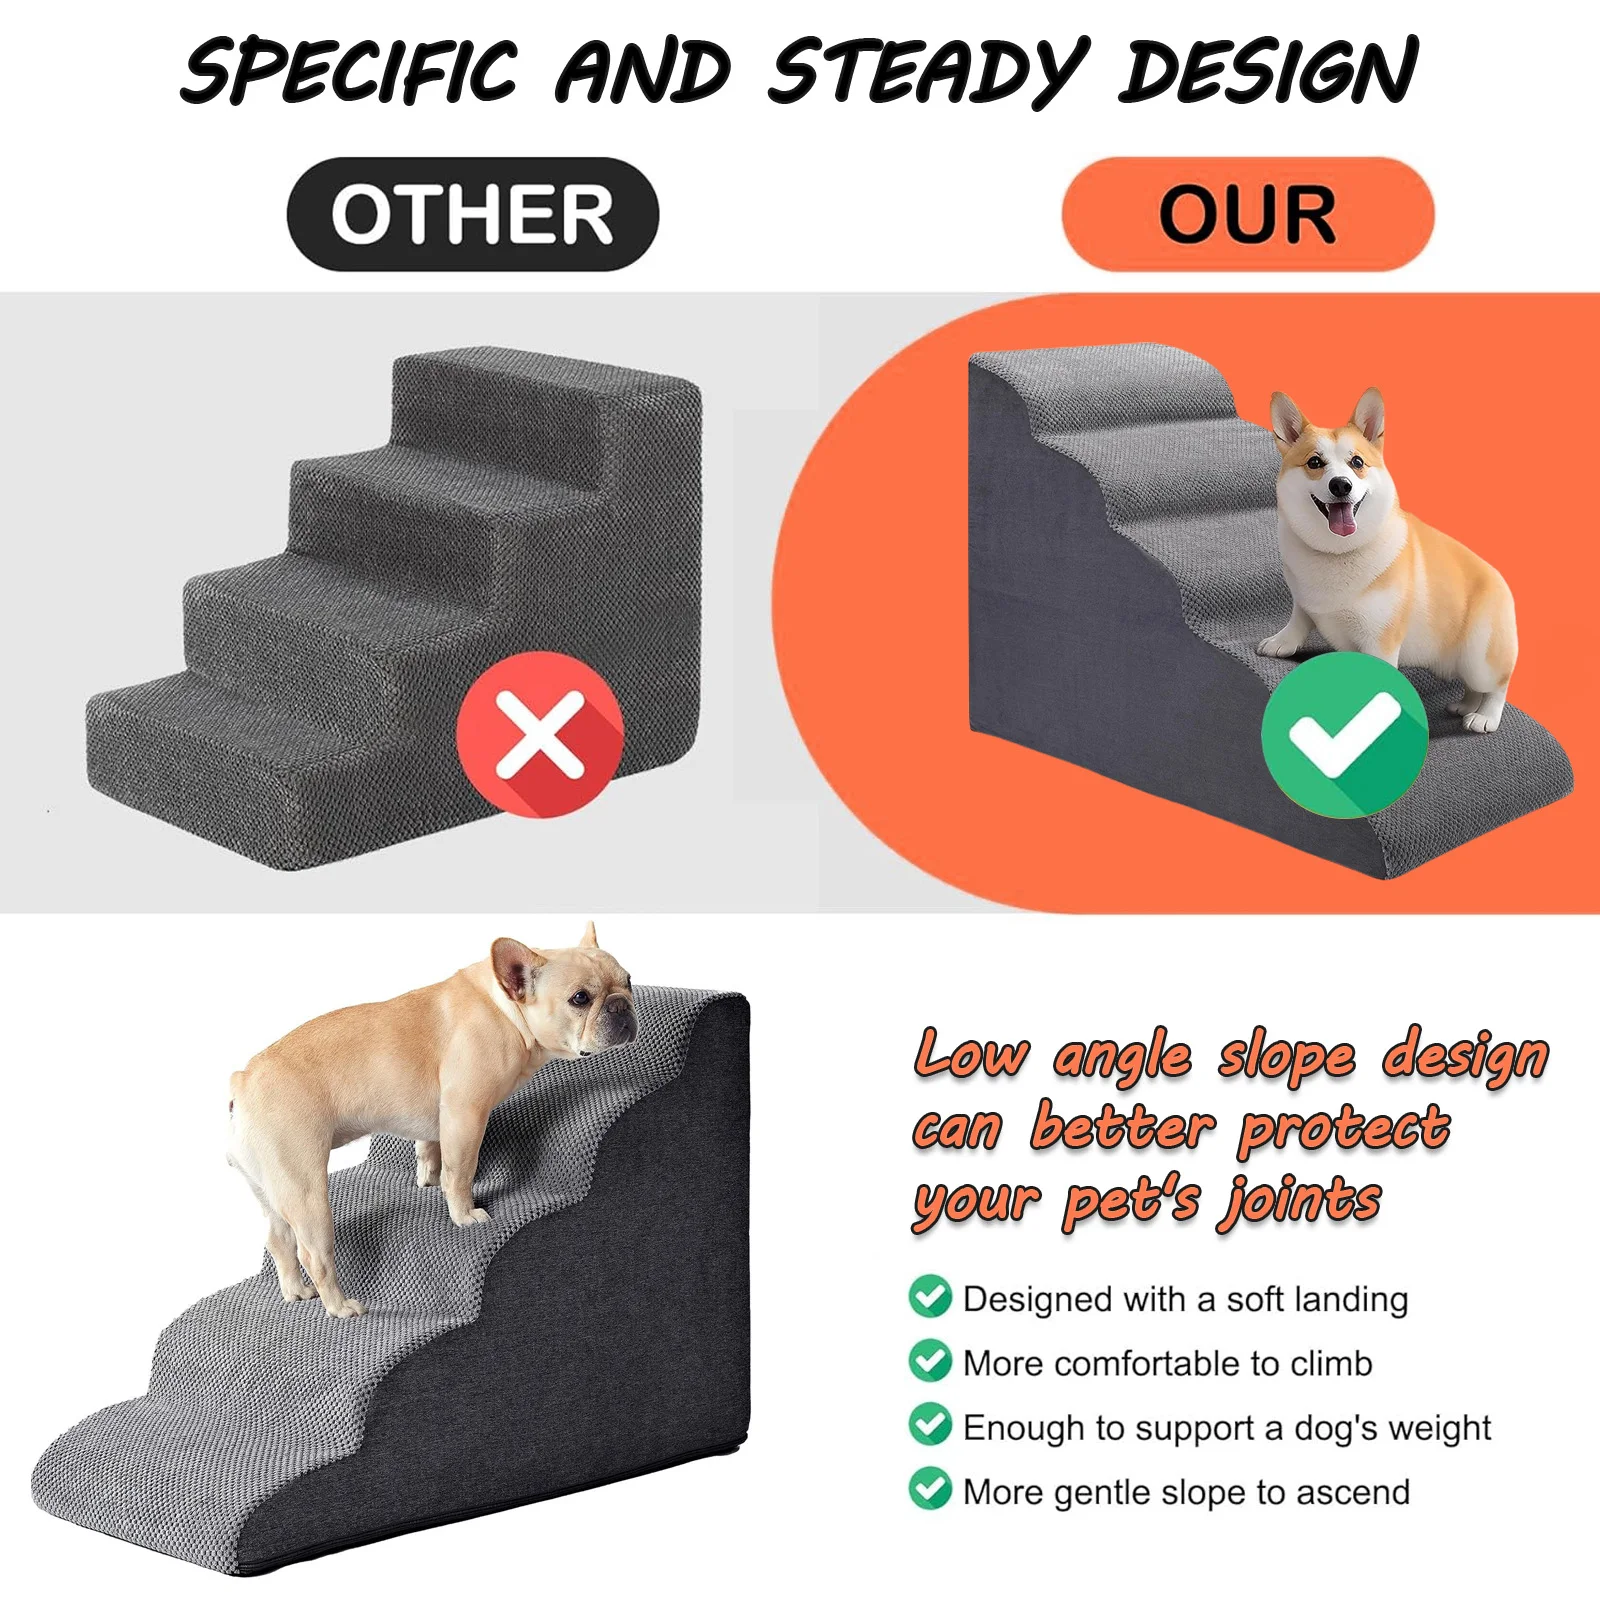 Dog Stairs for High Beds 5-Step Dog Steps for Small Dogs and Cats Pet Stairs Climbing Non-Slip Balanced Indoor Step